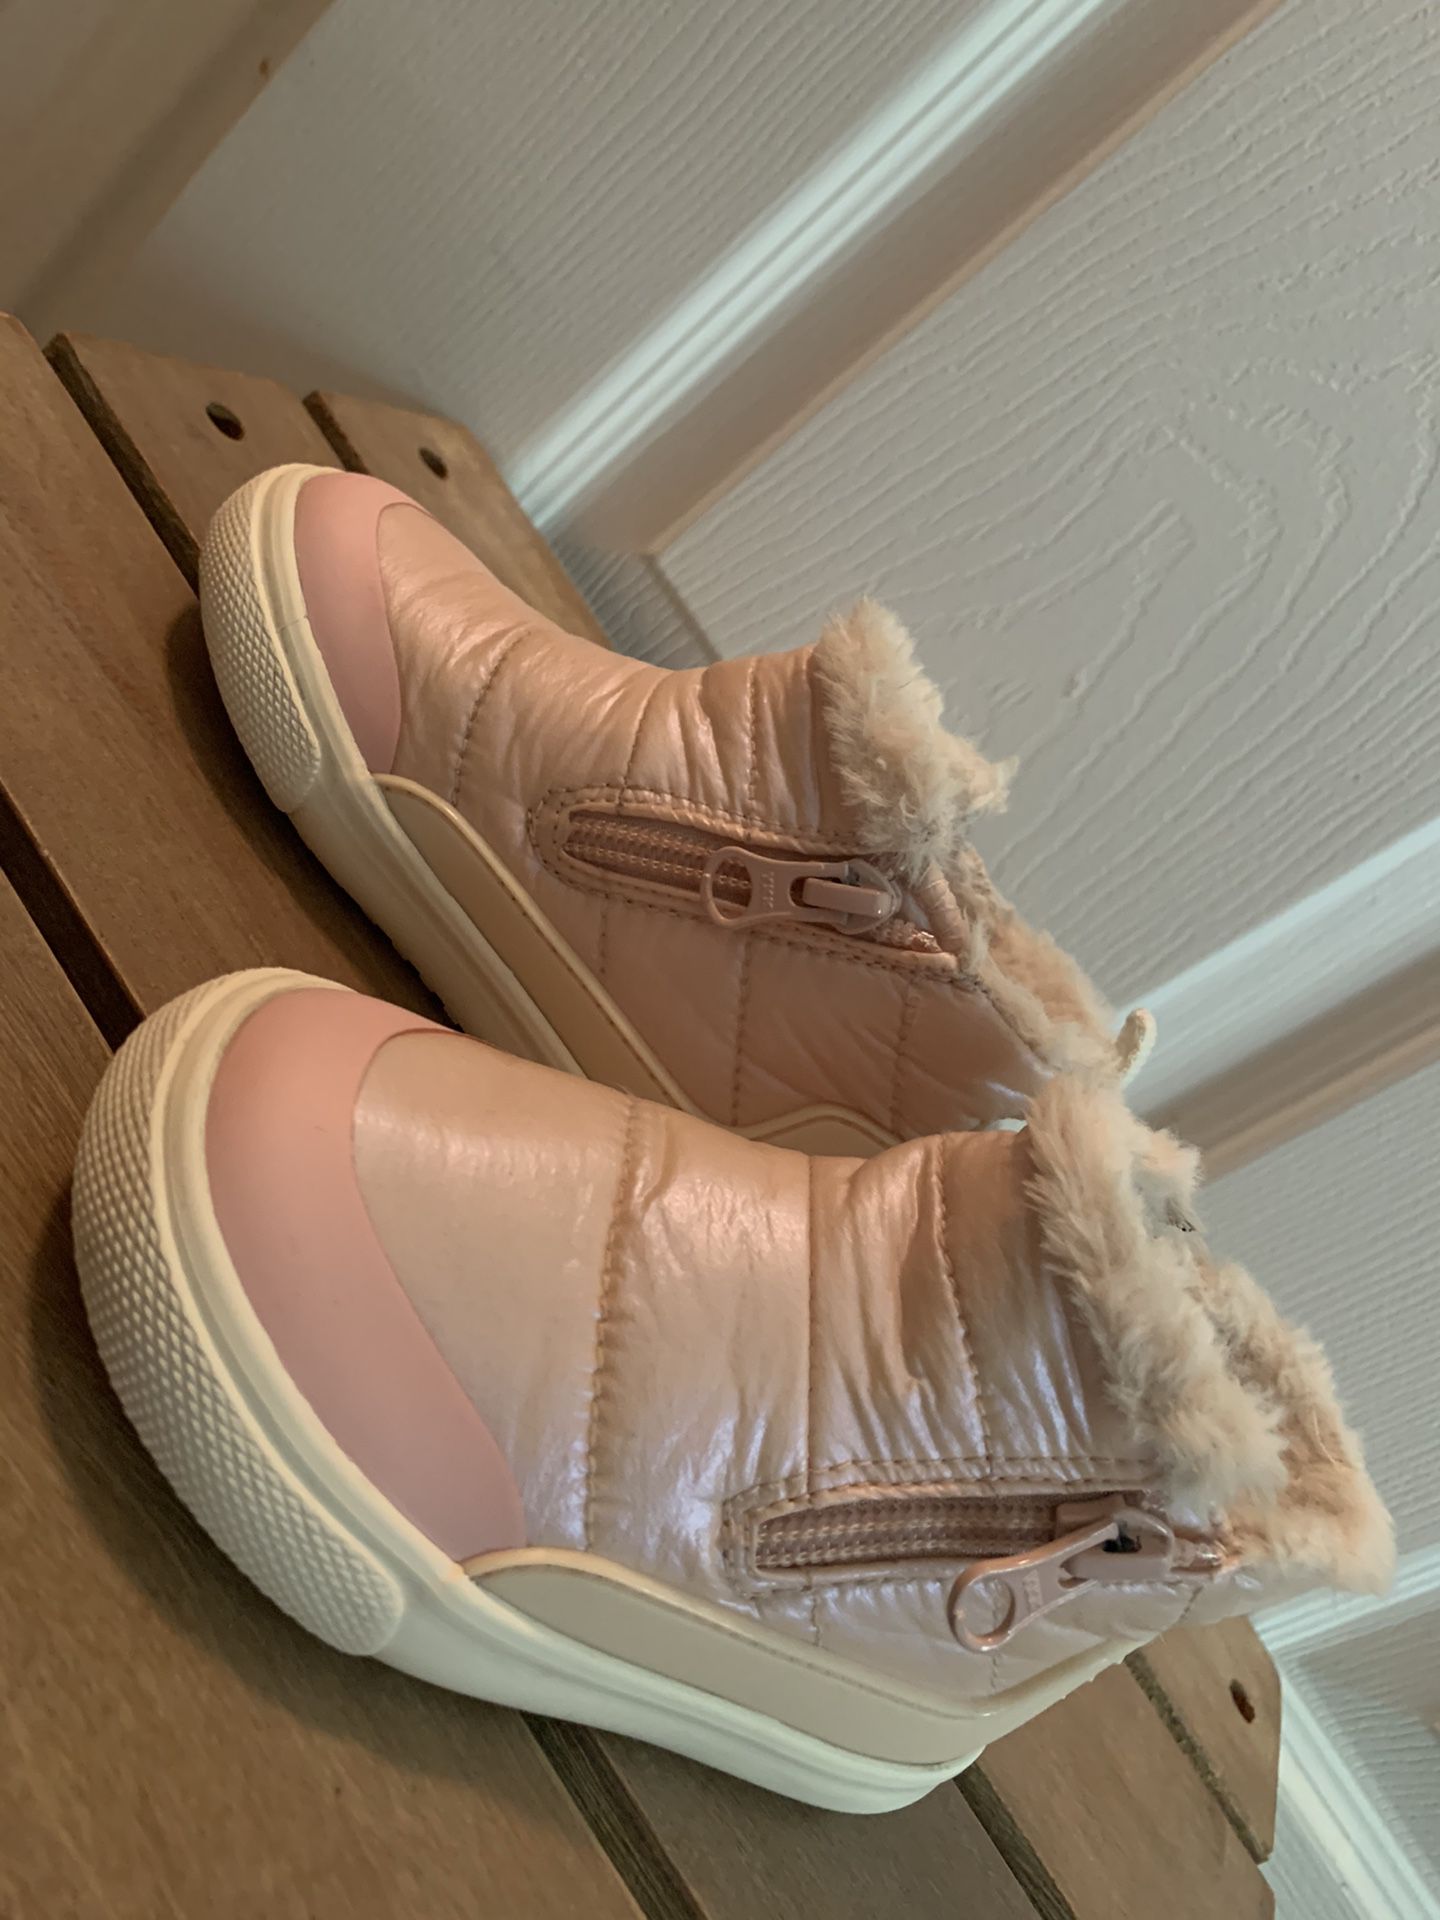 Toddler Girl Snow Boots 